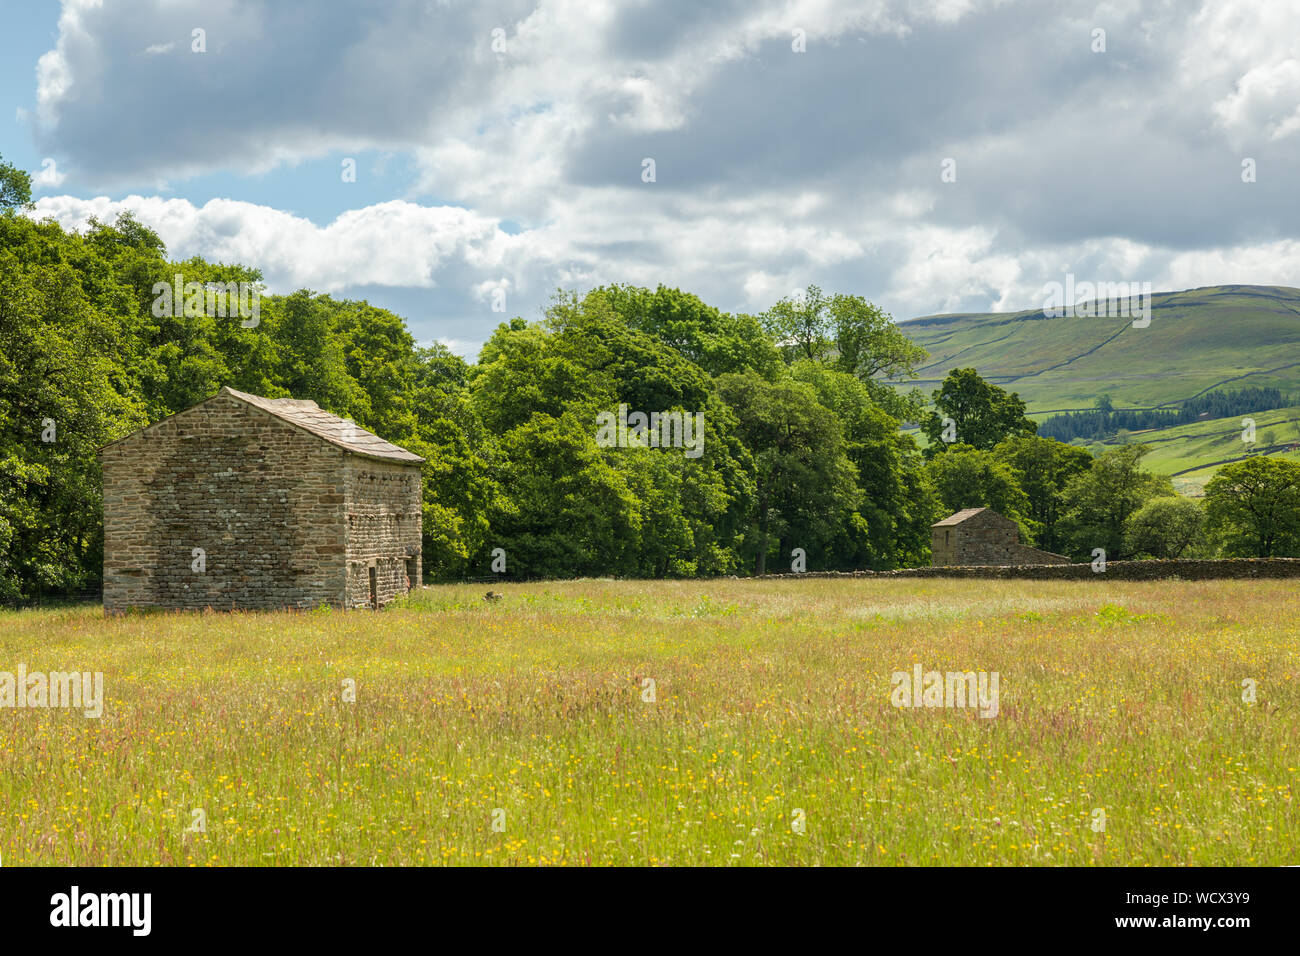 Field barn near Muker in the Muker Meadows in Swaledale.  The stone barn is surrounded by buttercups in a hay meadow. Stock Photo